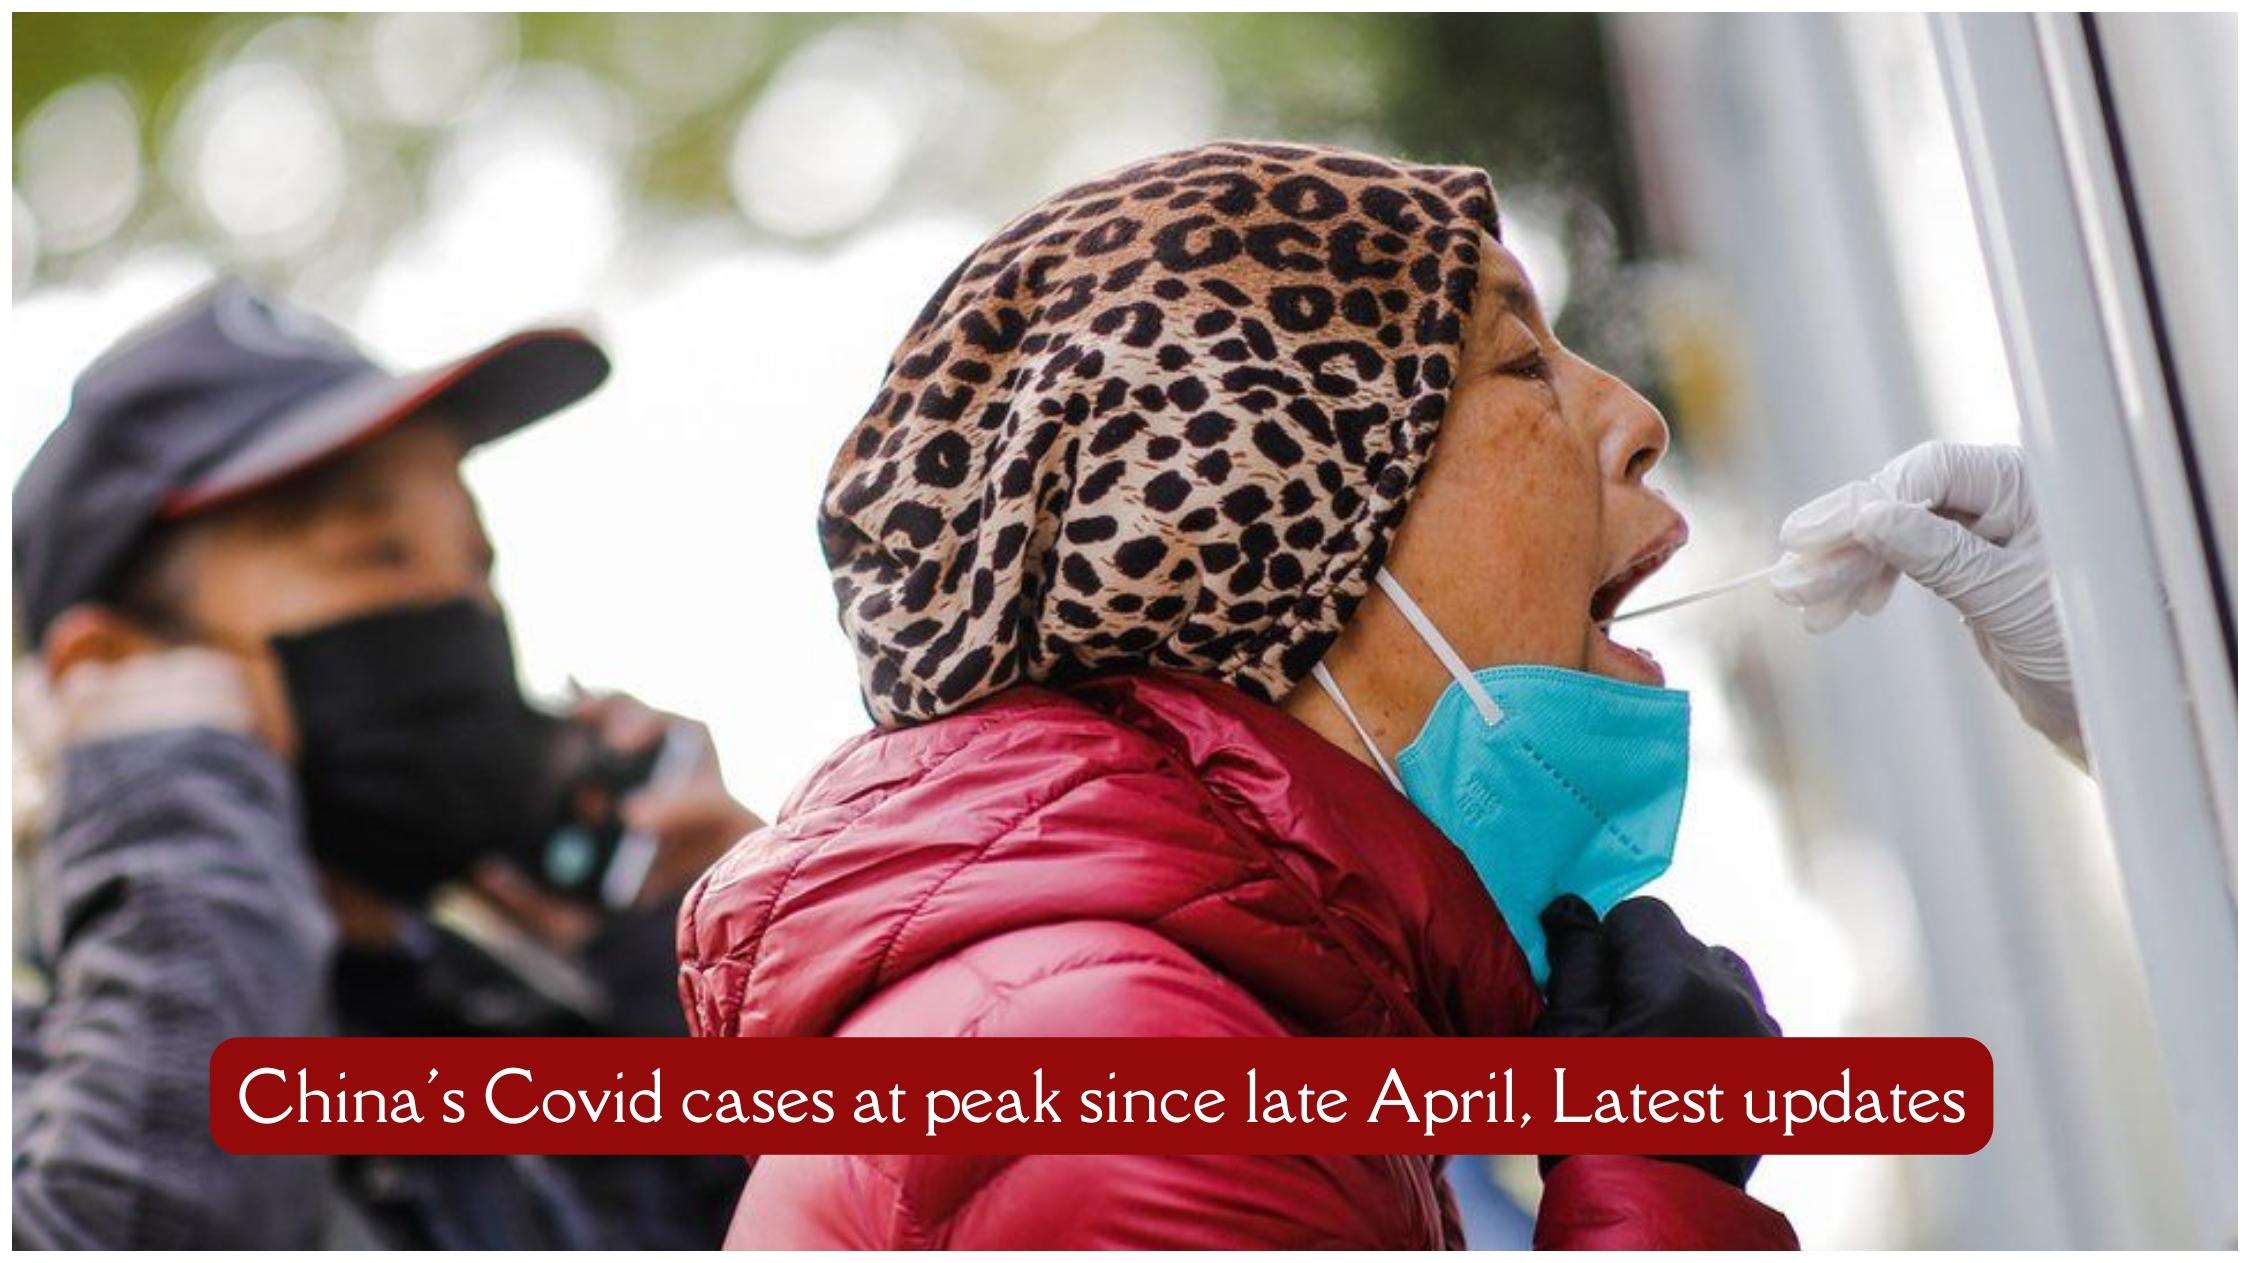 China recorded its largest Covid infections since late April, just one day after it introduced a slew of new measures.